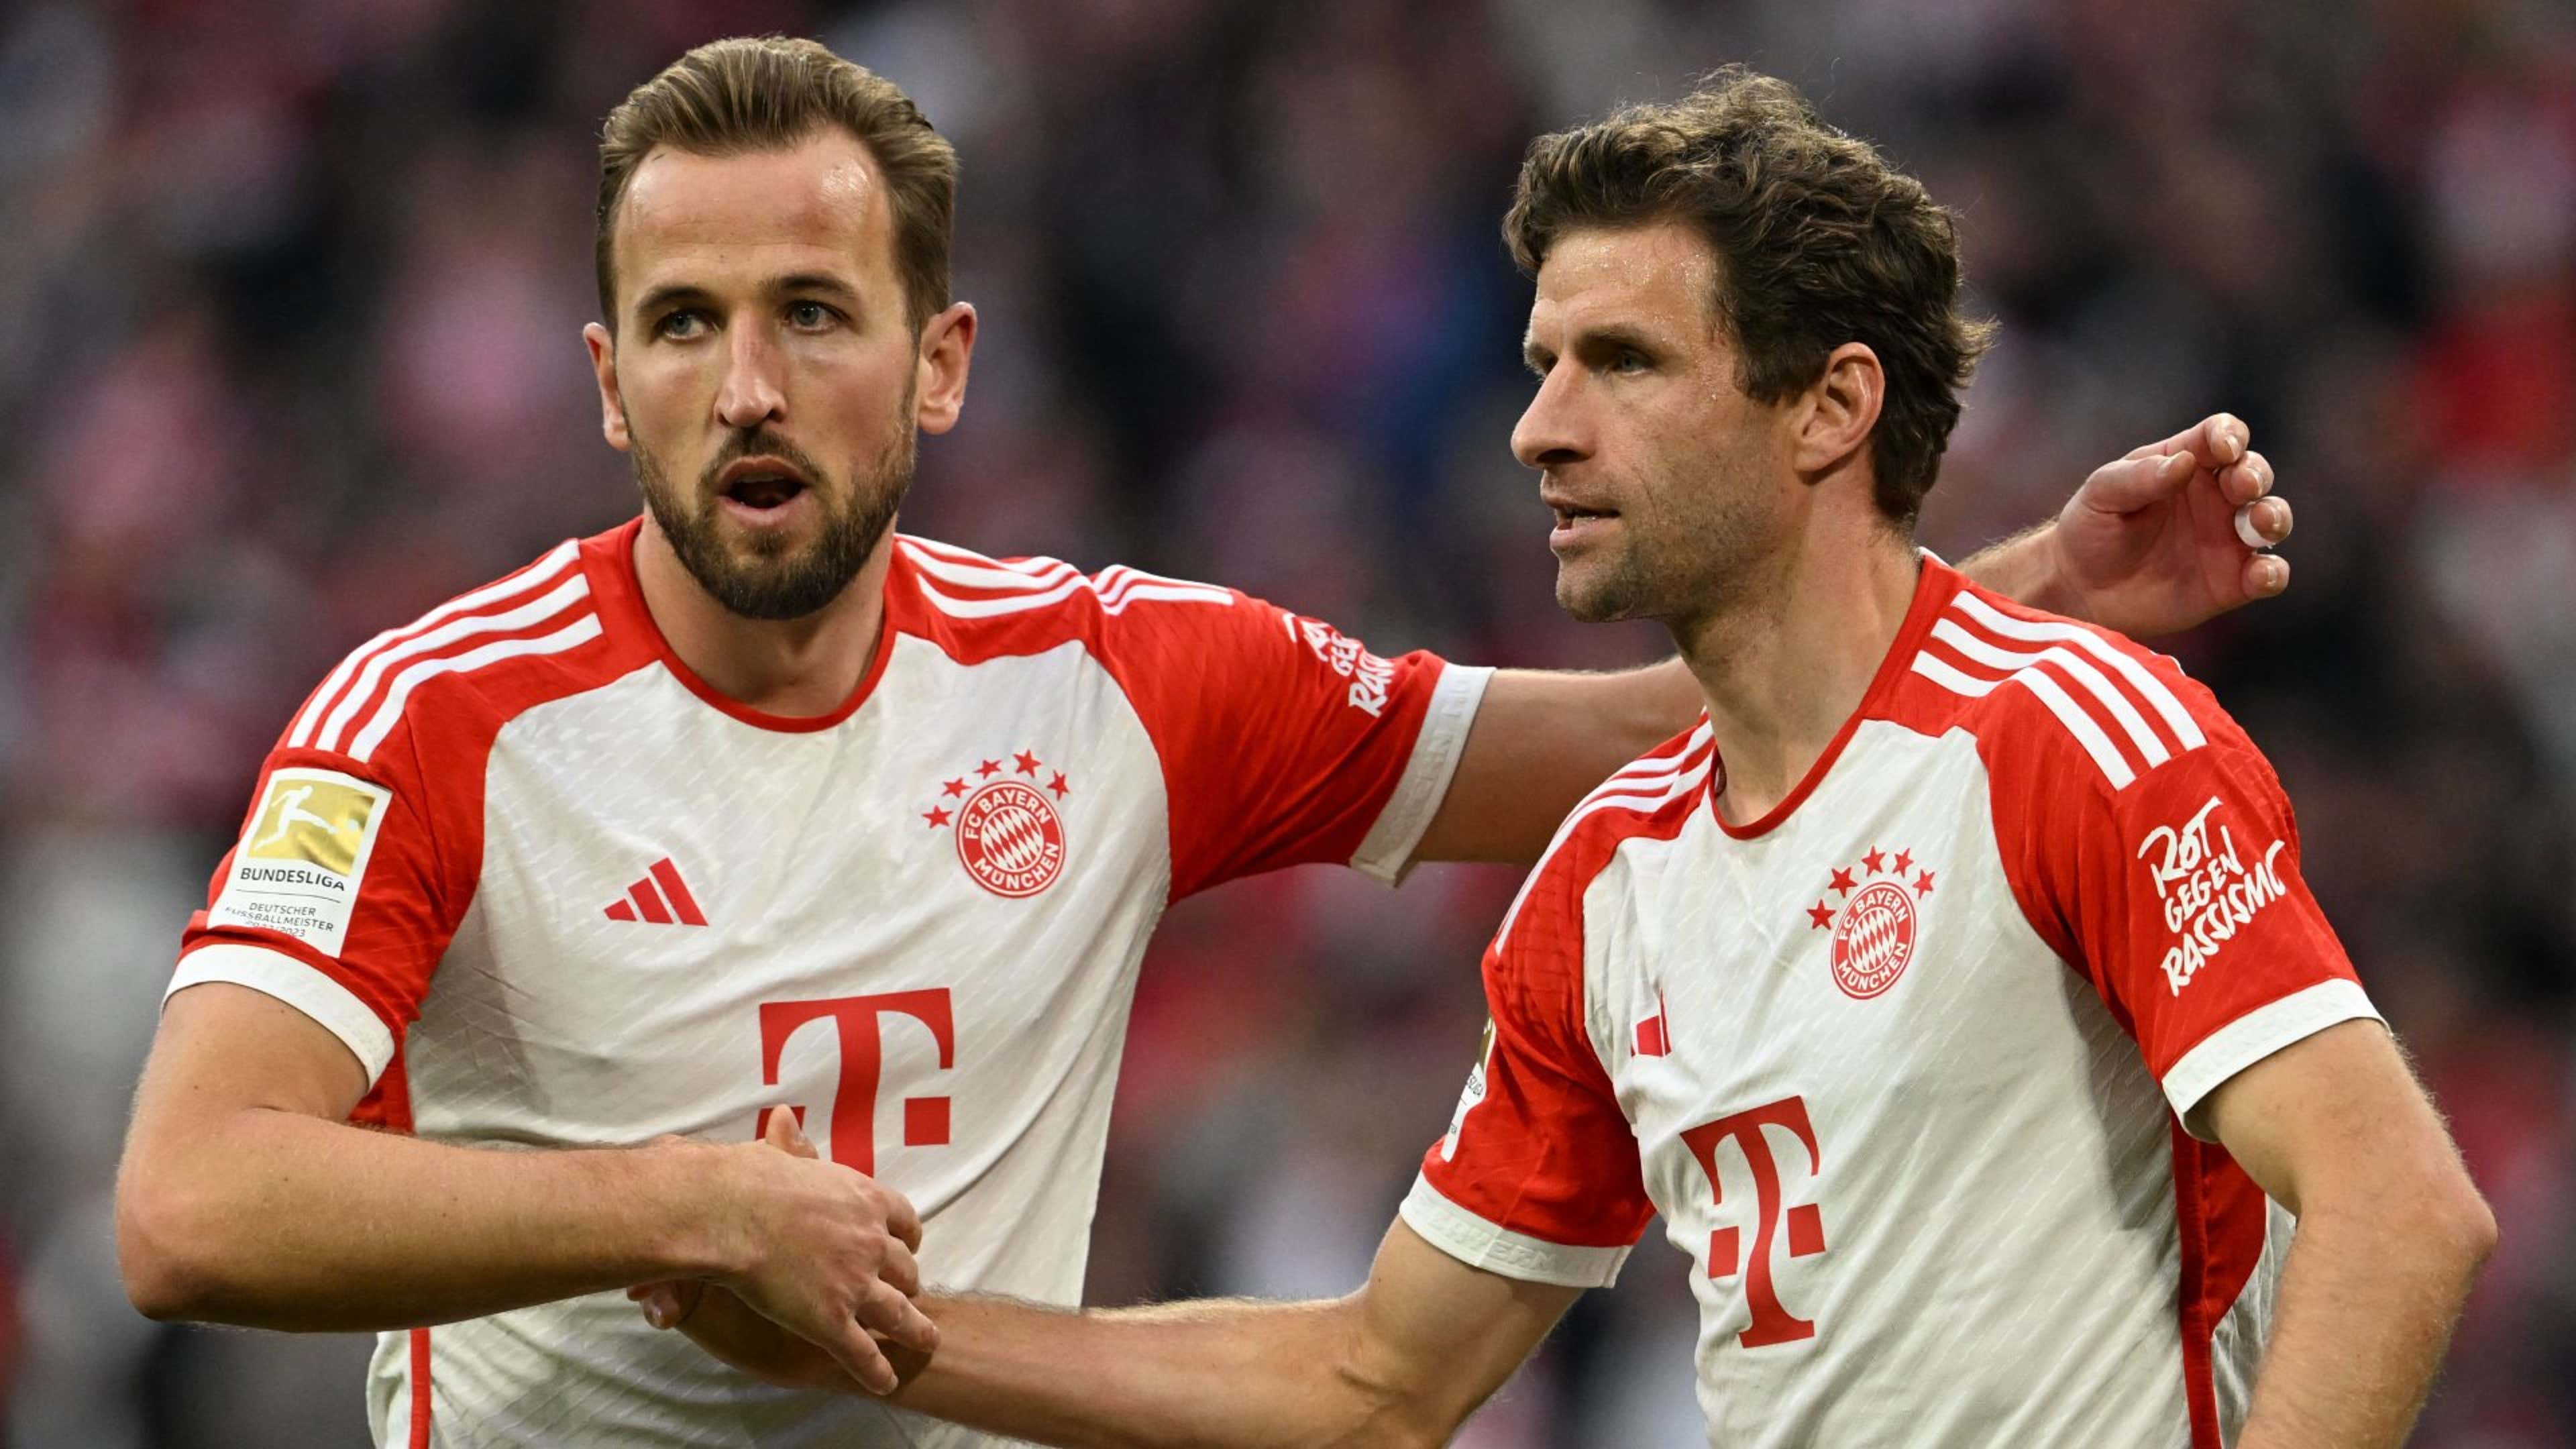 Your hotel room gets smaller and smaller now!' - Thomas Muller jokes with Harry Kane after Bayern striker scores another hat-trick in Klassiker win | Goal.com